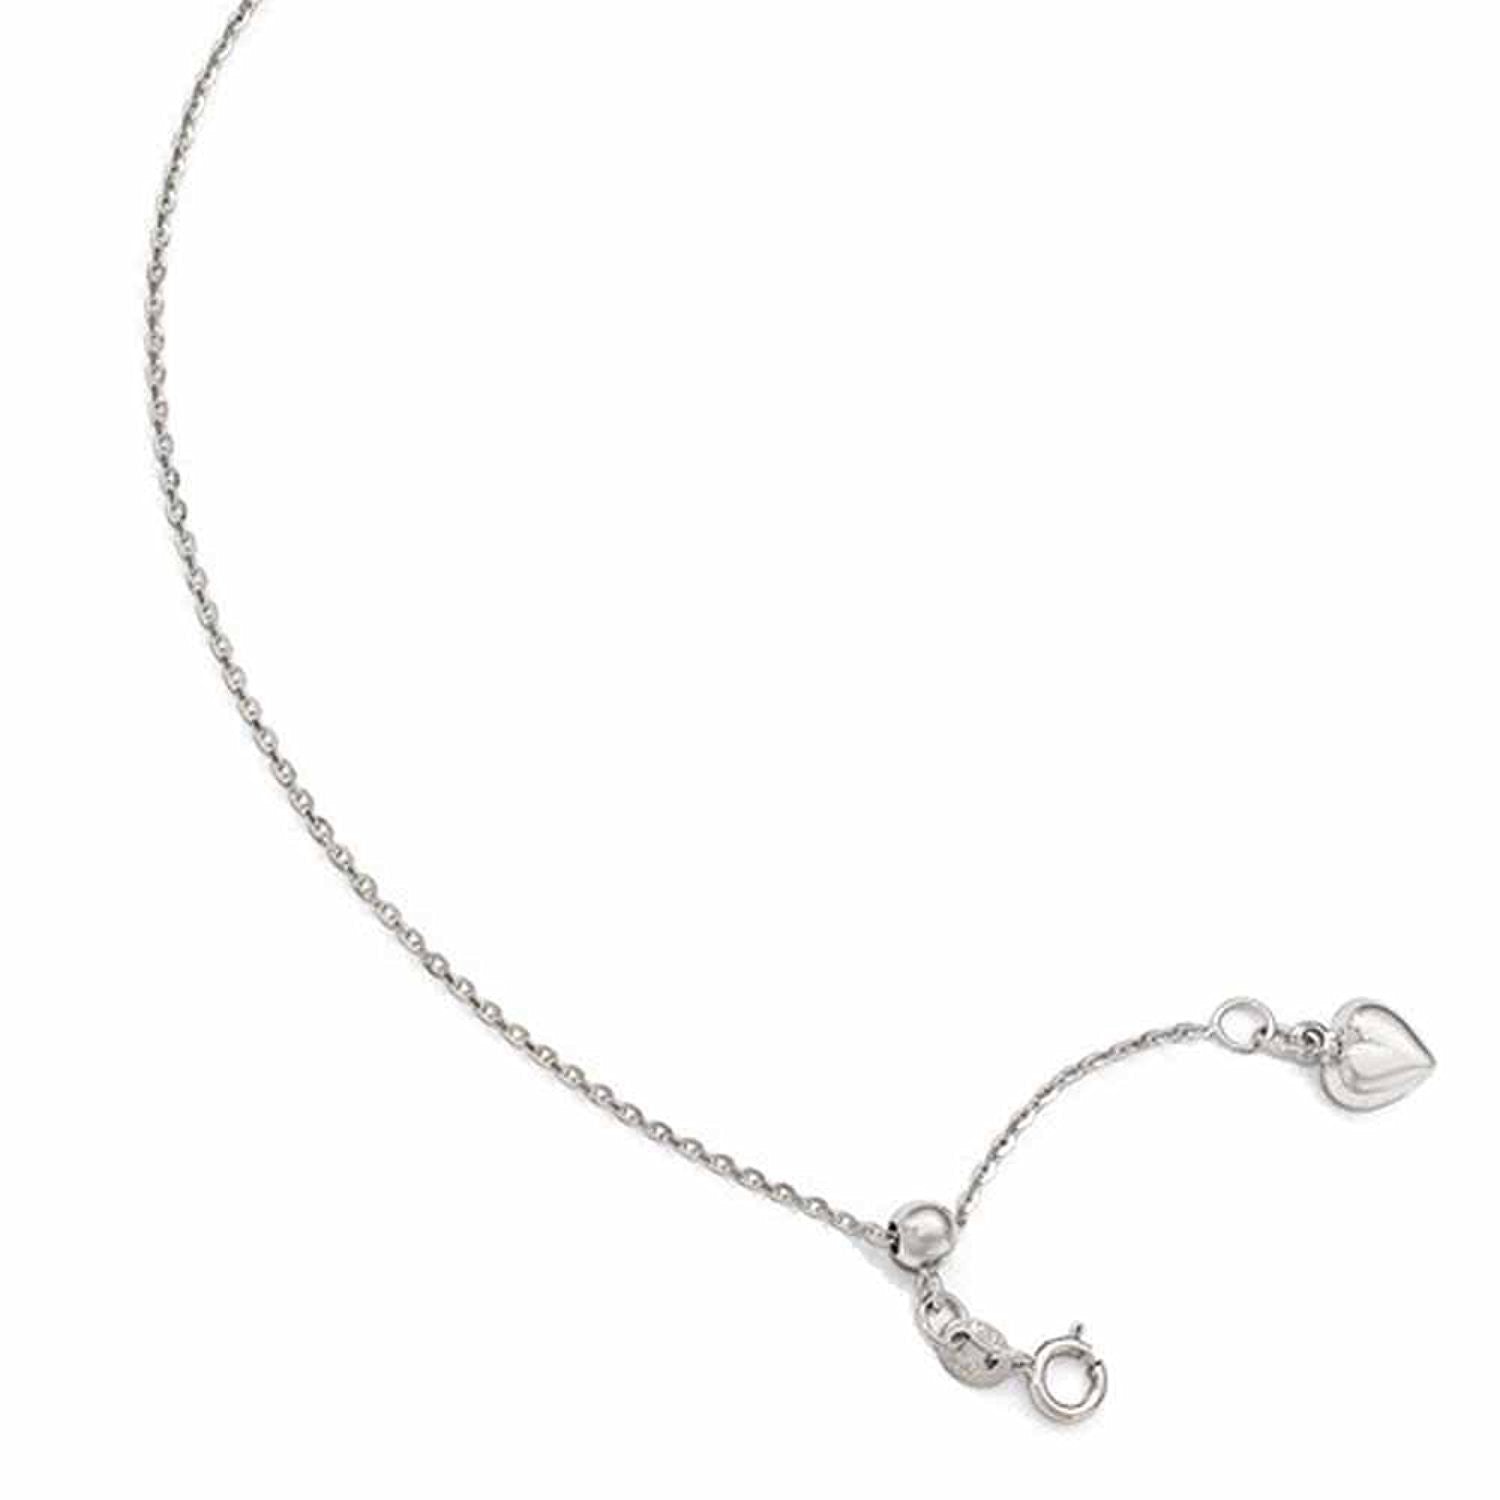 14k White Gold Heart Dangle Anklet Adjustable to 11 inches